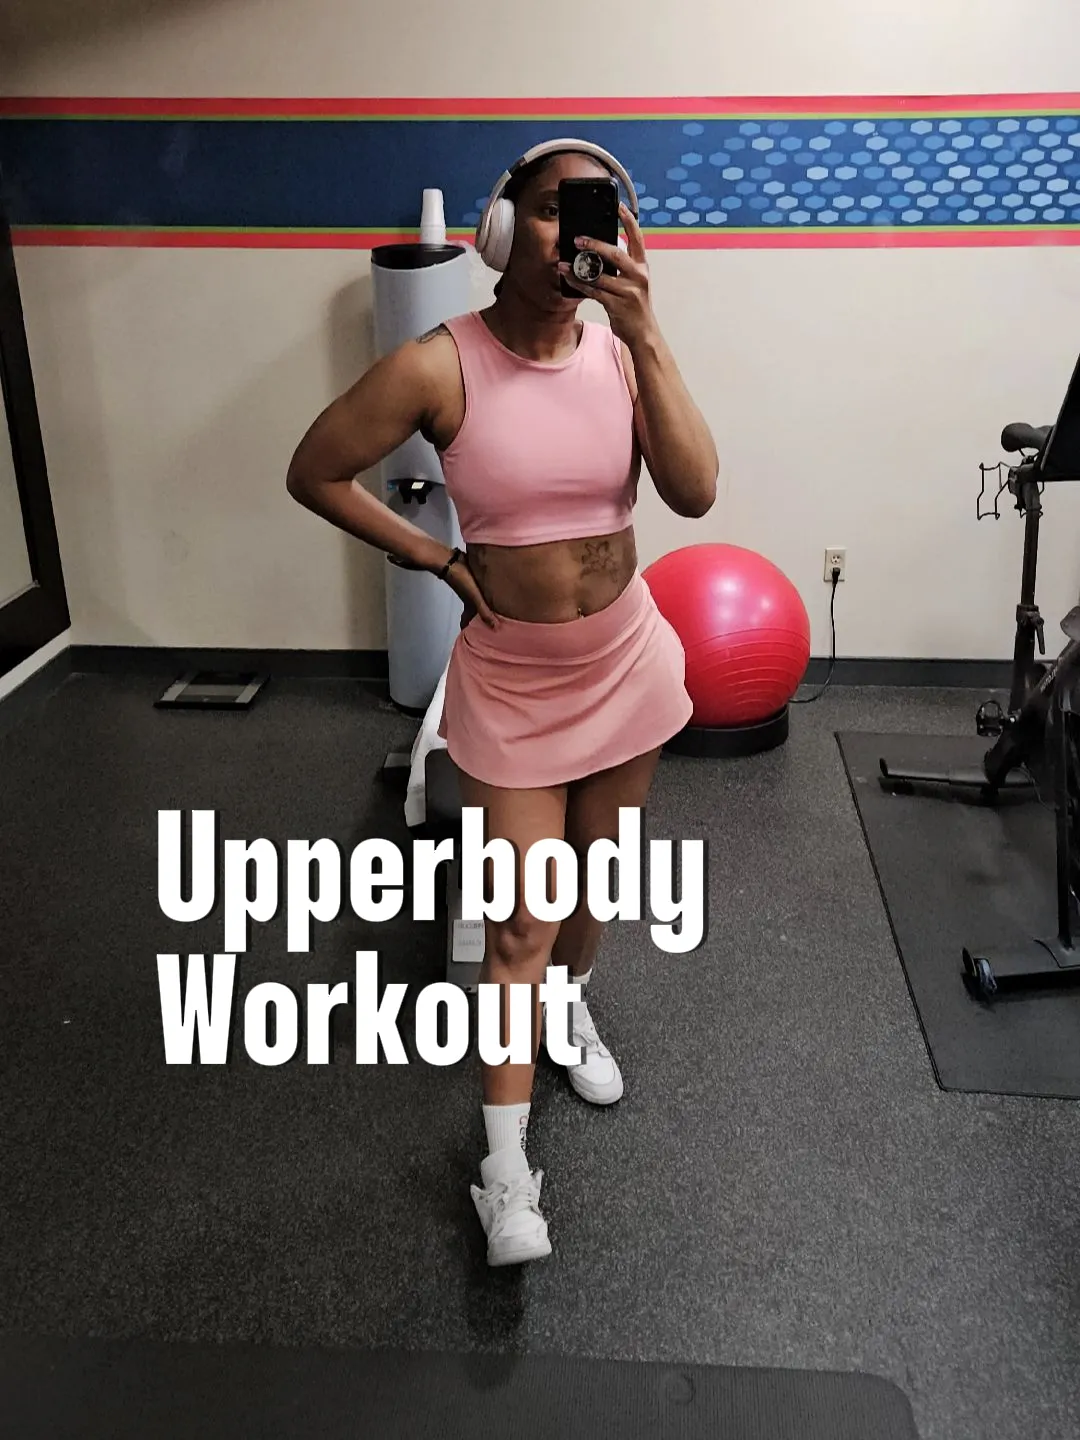 Upperbody workout (vacation gym)  Video published by Jerrica J